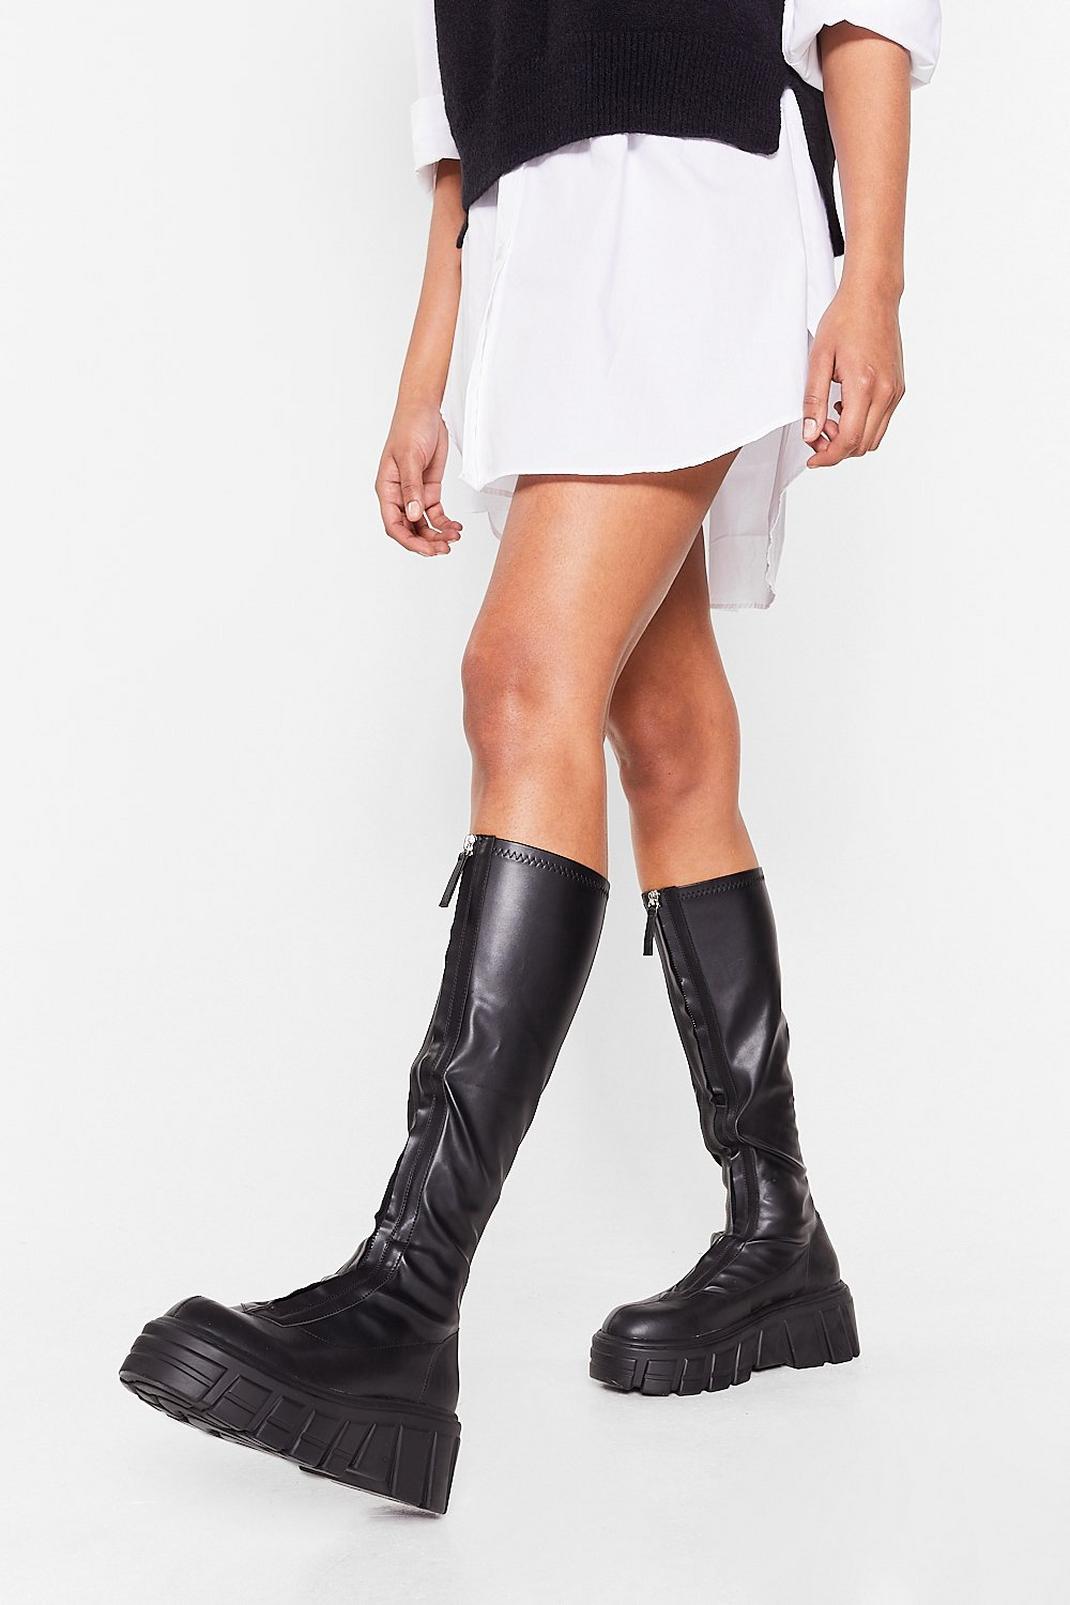 Black Faux Leather Calf High Rain Boots image number 1